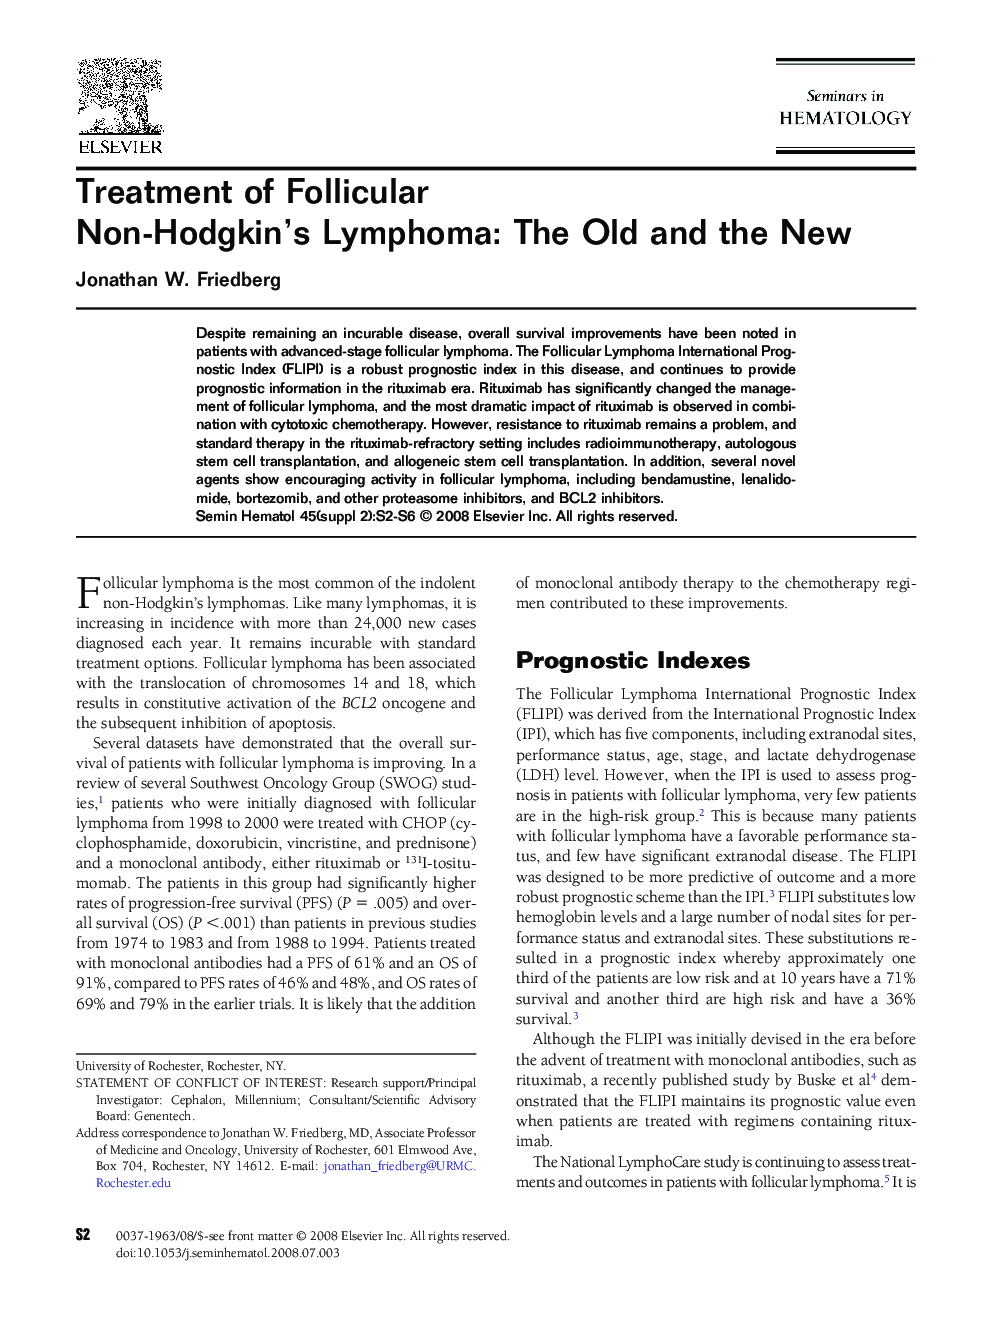 Treatment of Follicular Non-Hodgkin's Lymphoma: The Old and the New 